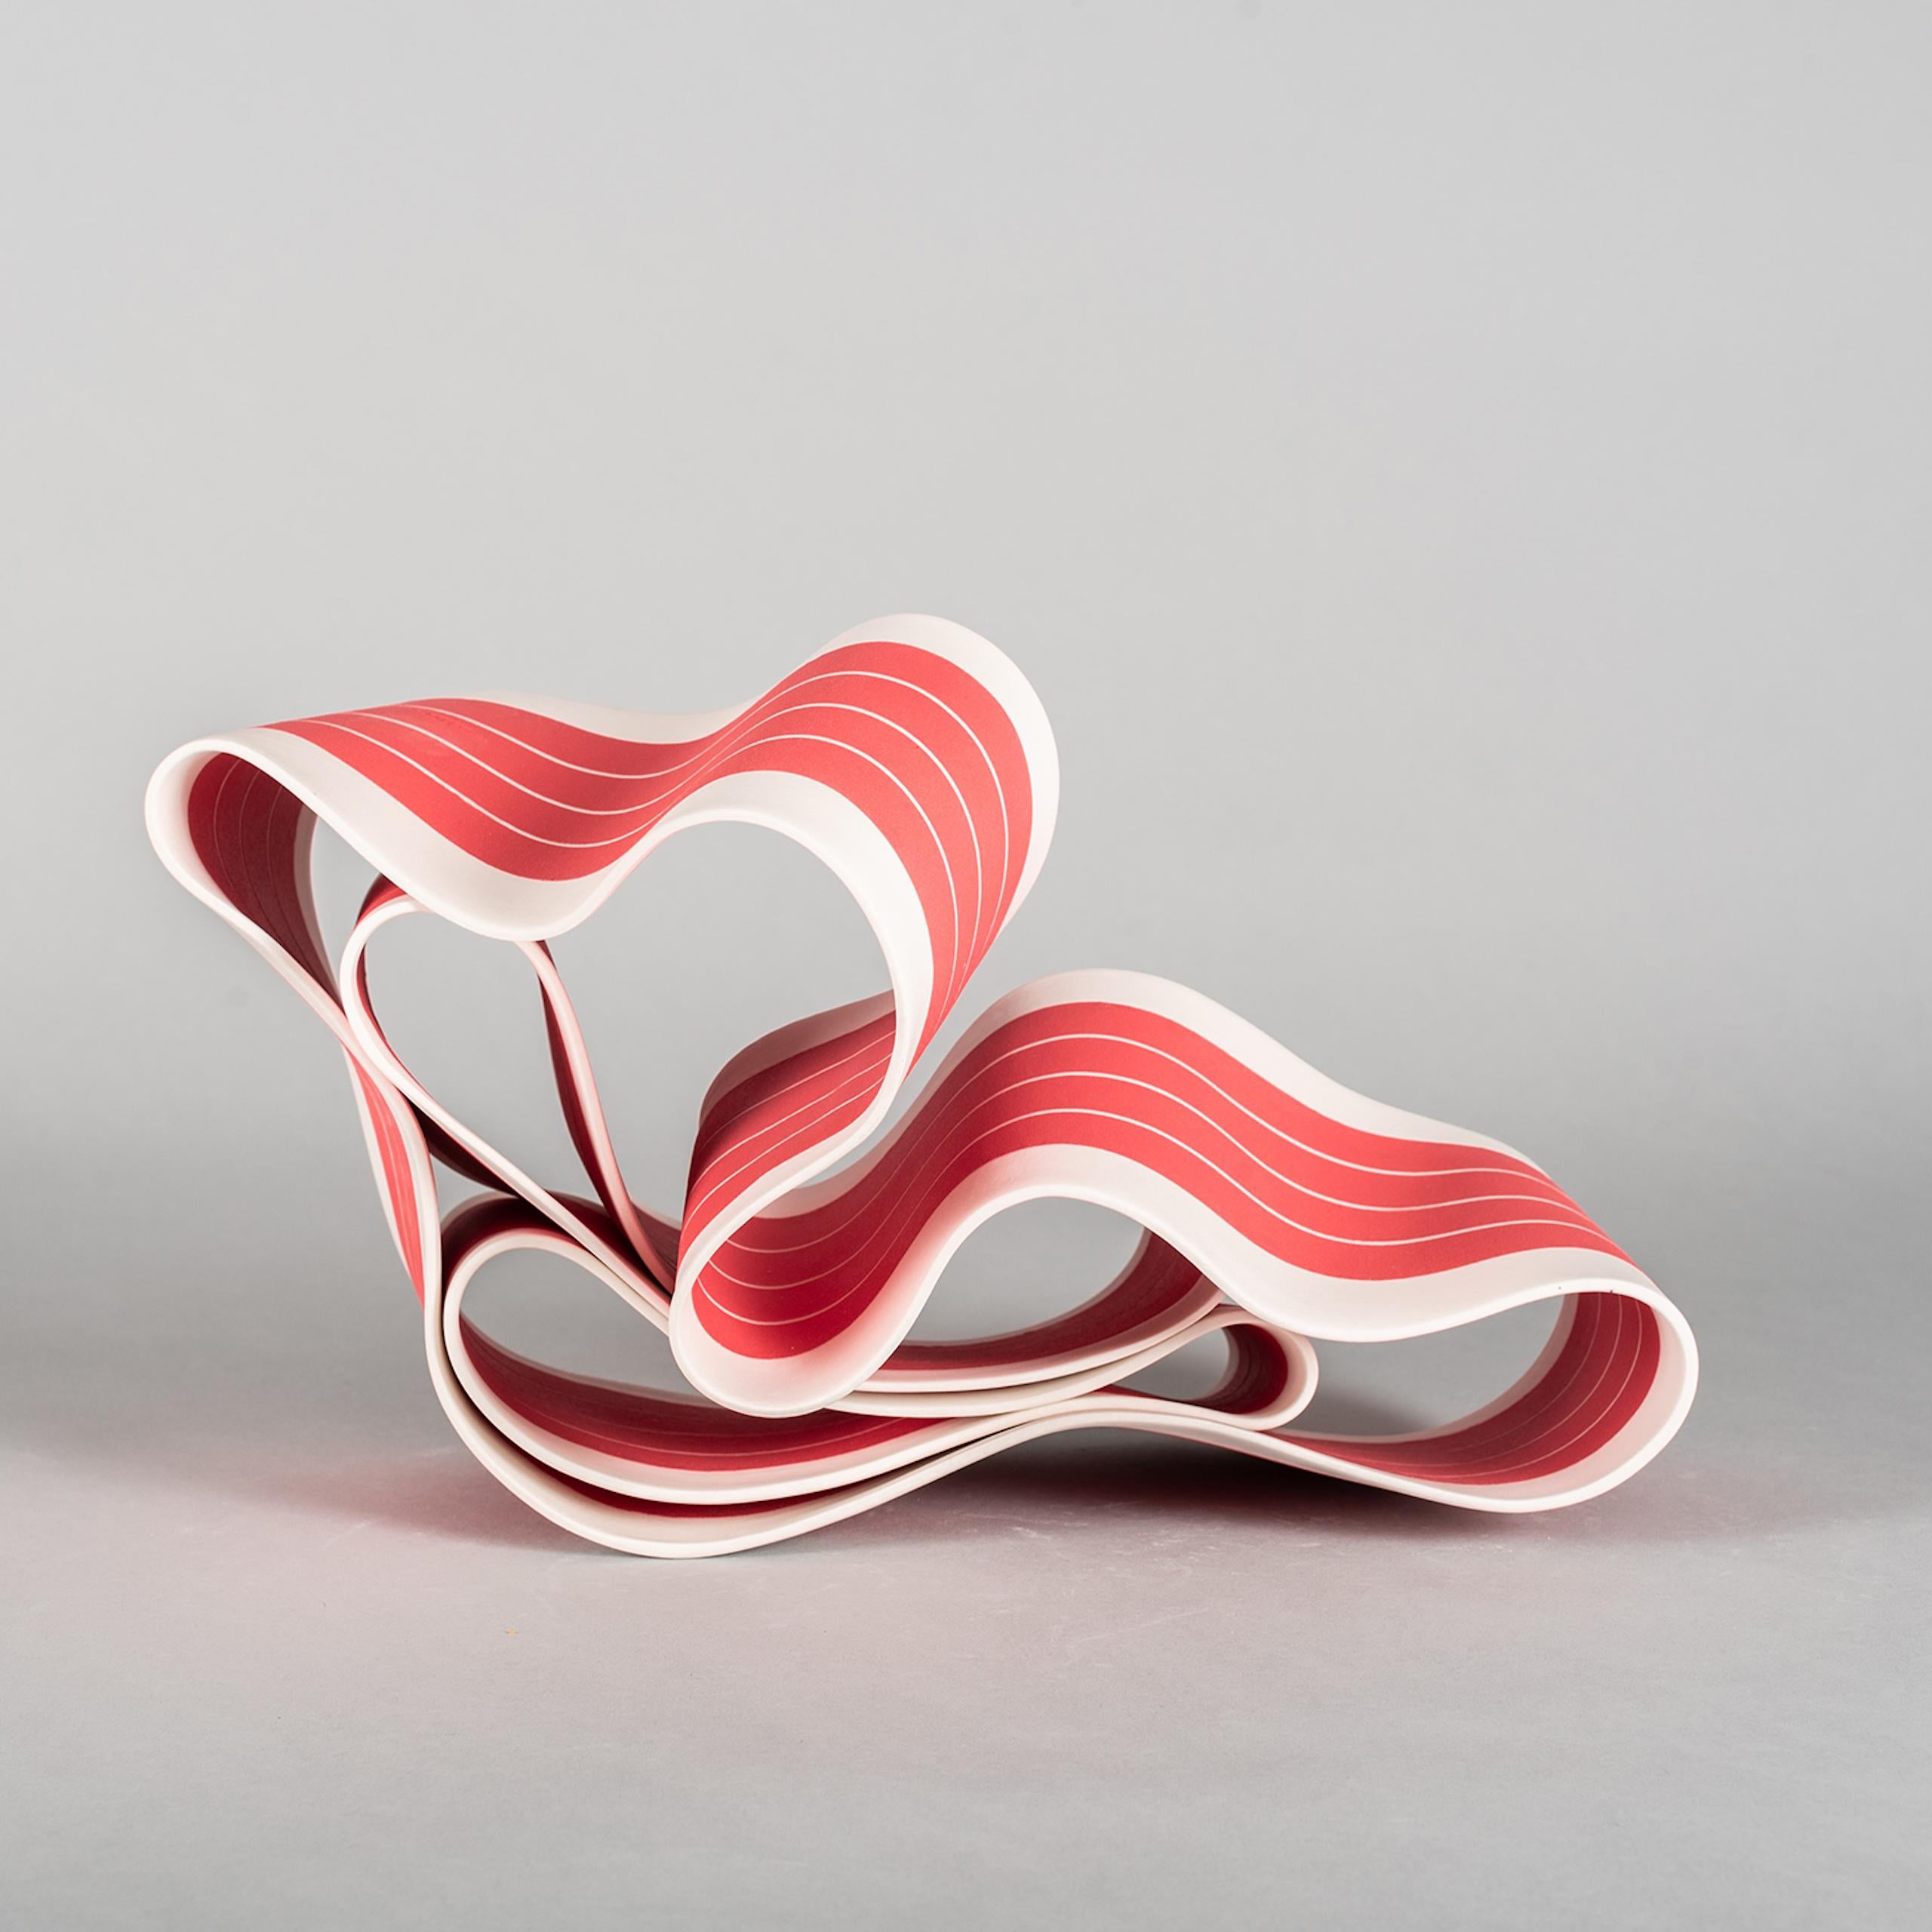 Folding in Motion 3 by Simcha Even-Chen - porcelain sculpture, red For Sale 3